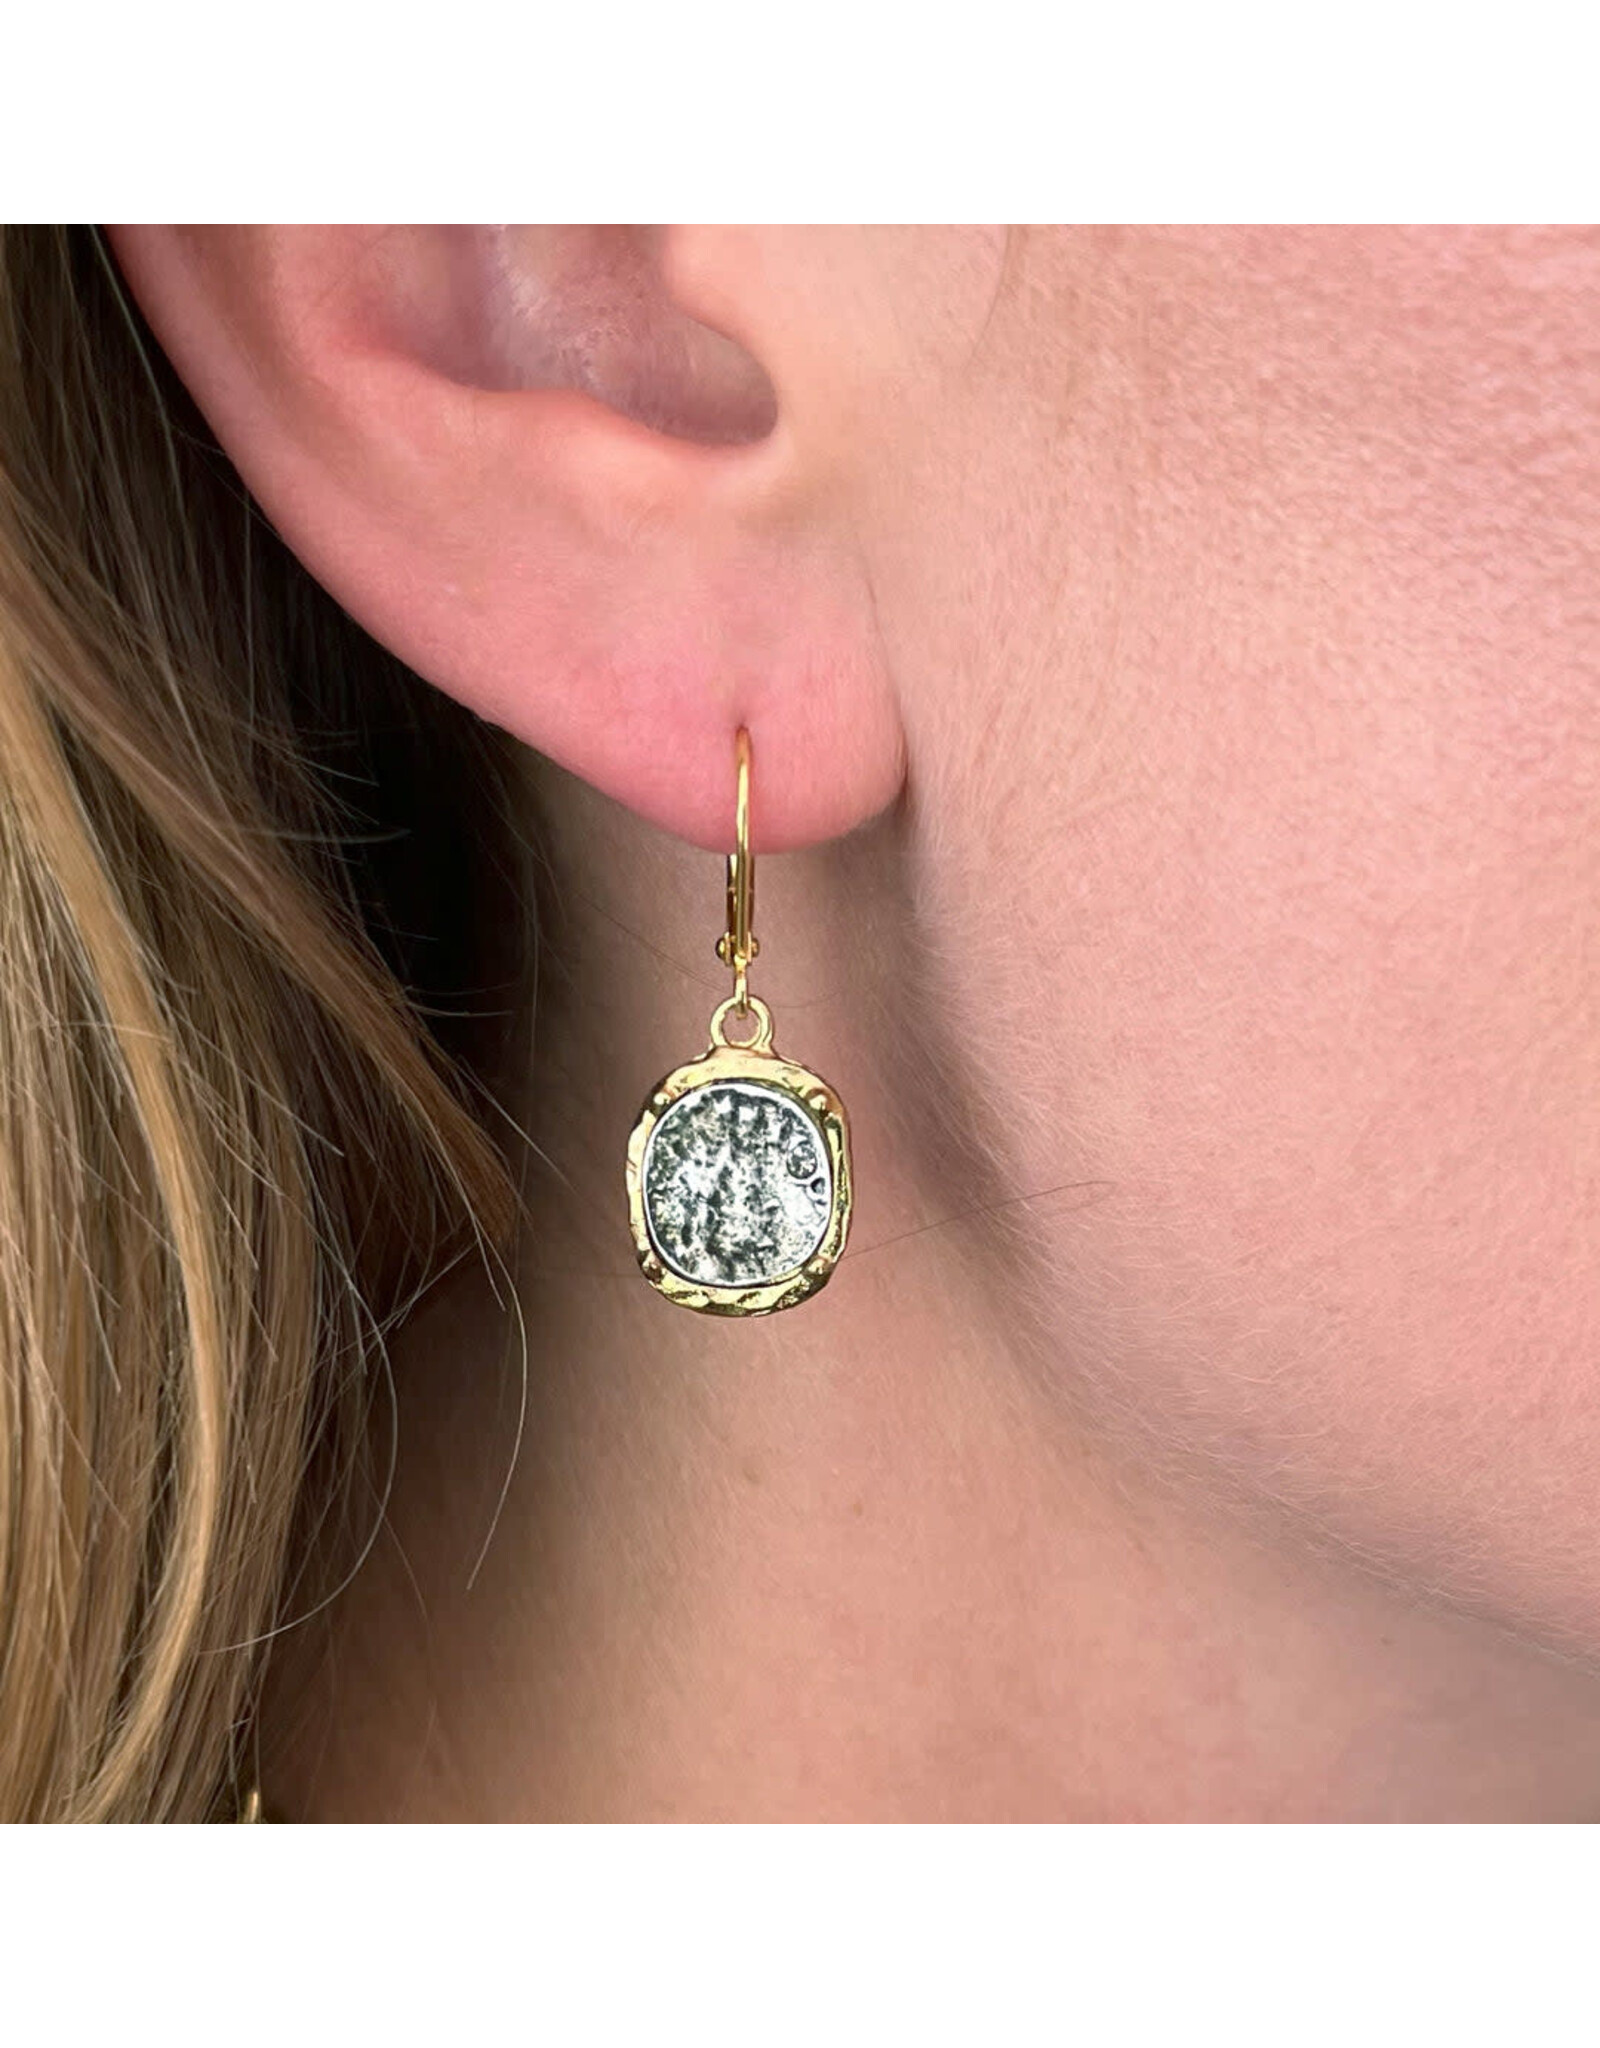 TAT2 Designs Gold Dangling Coin w/ Crystal Earrings